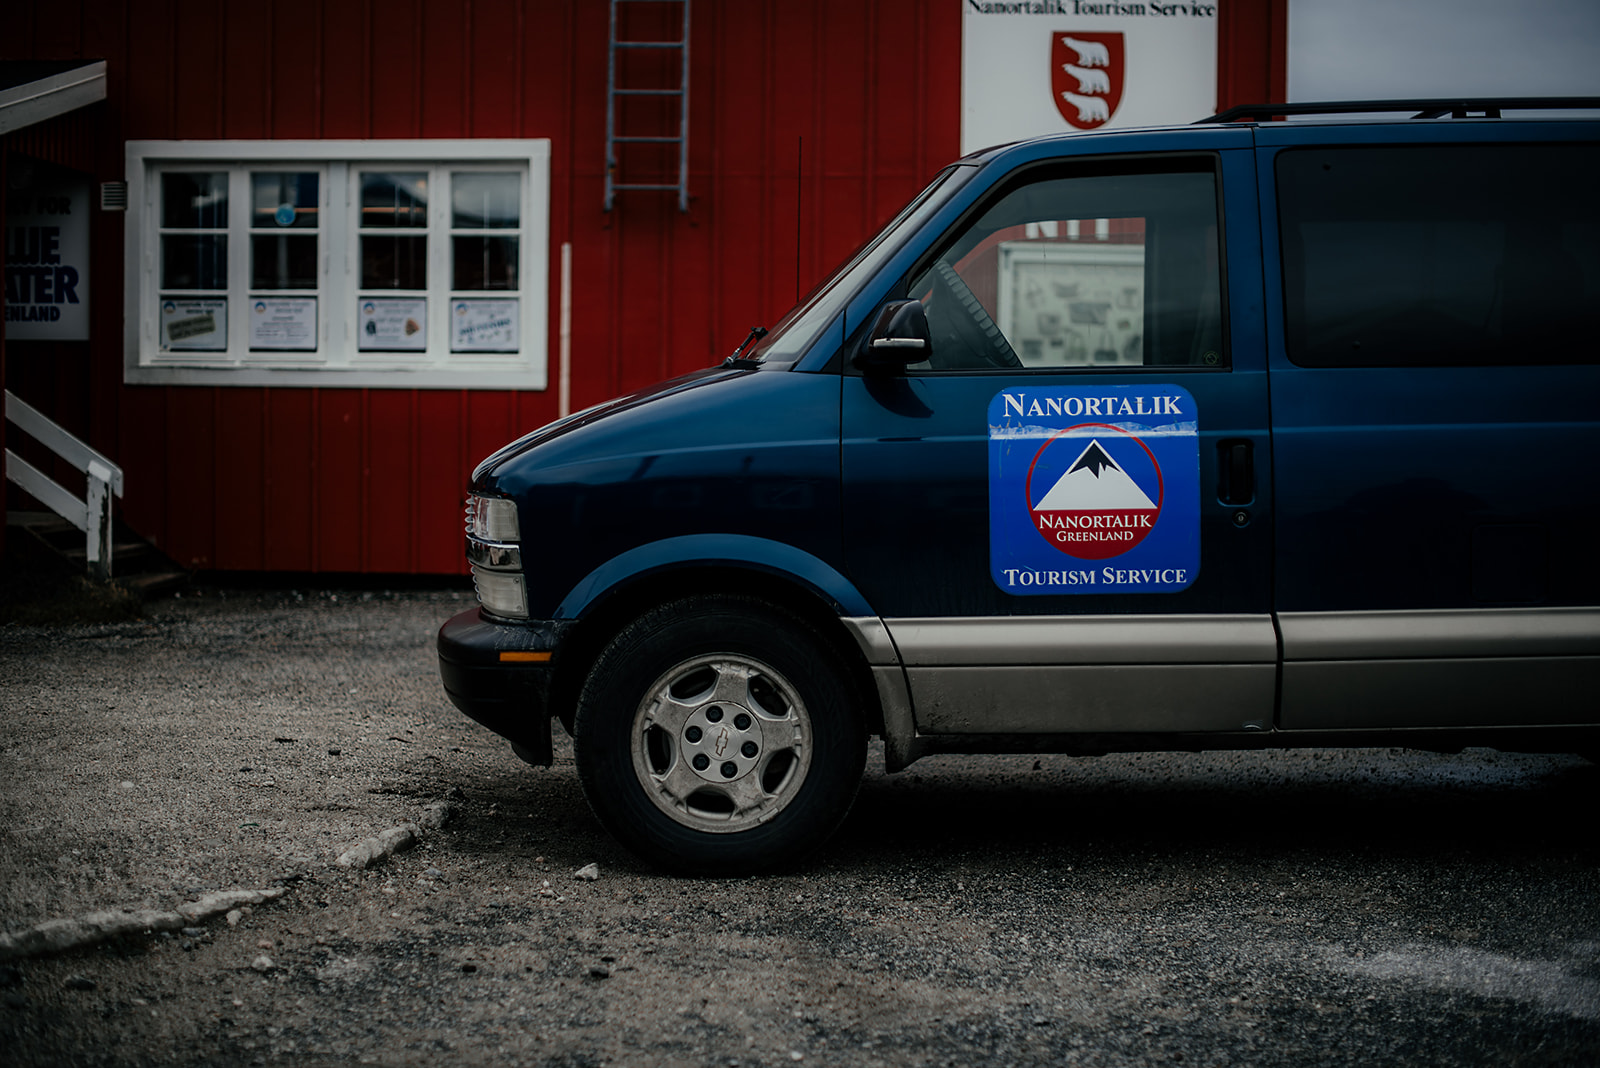 locale tourism bus on Greenland